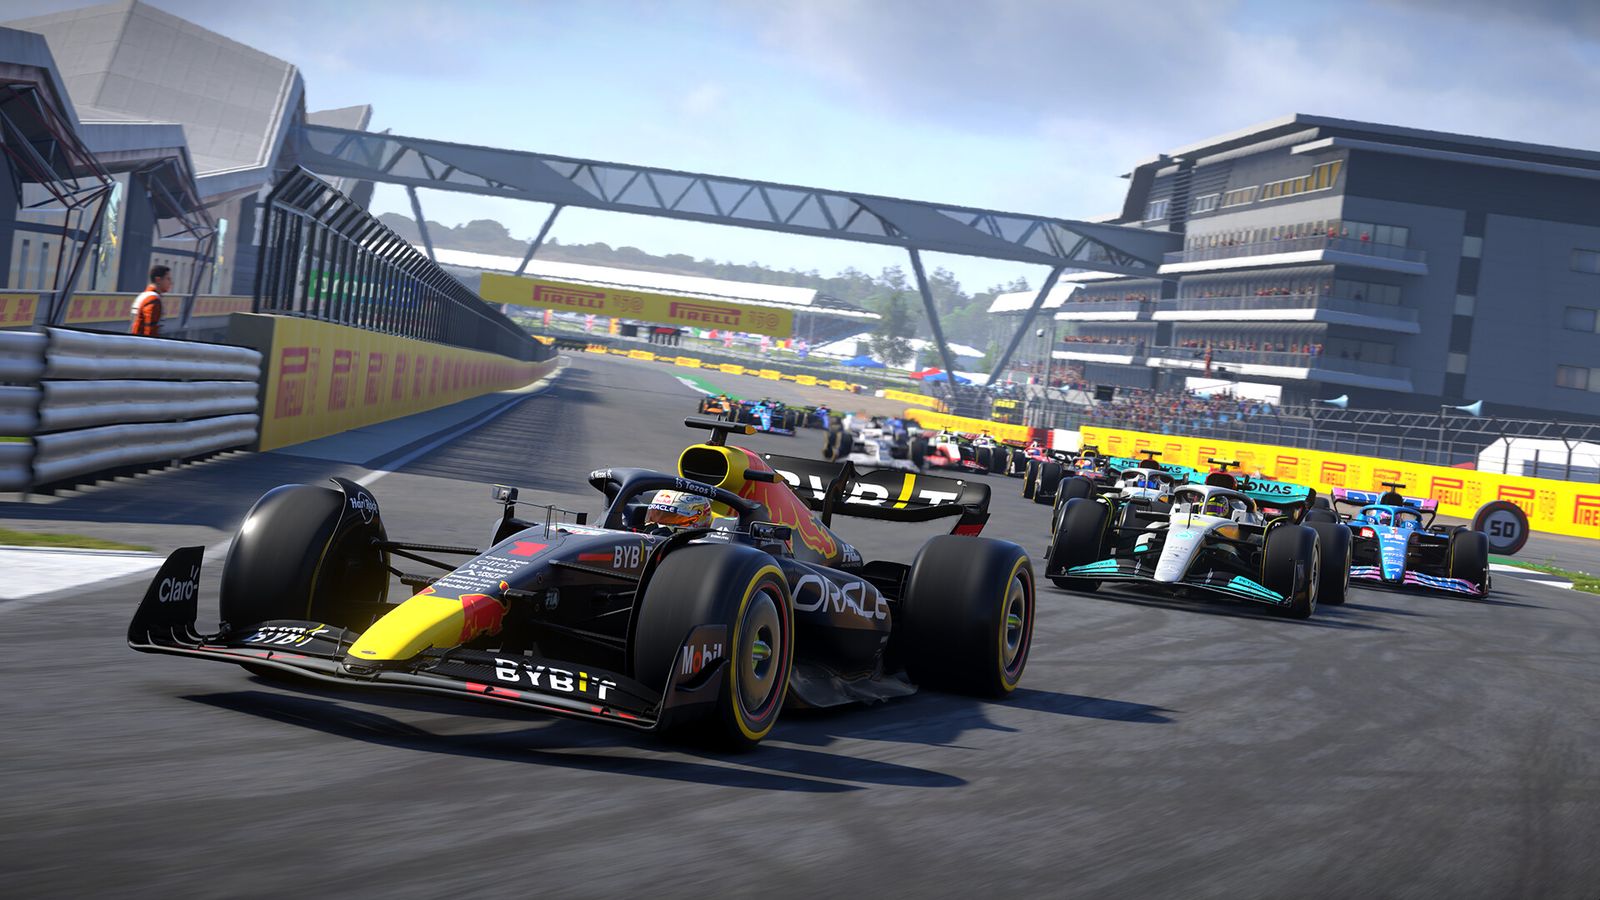 Is F1 22 on Xbox Game Pass?